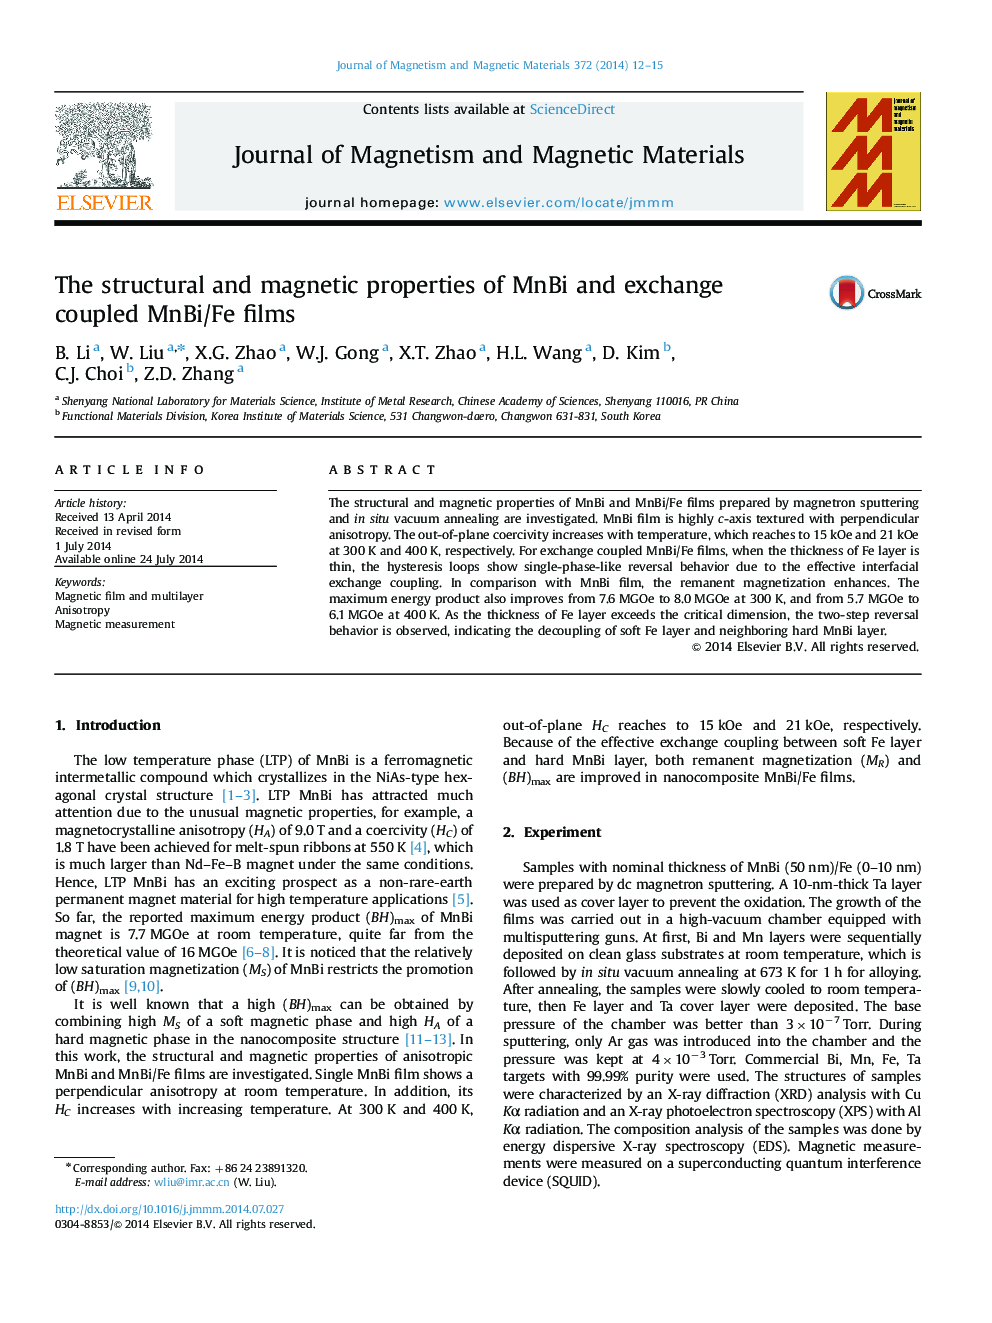 The structural and magnetic properties of MnBi and exchange coupled MnBi/Fe films